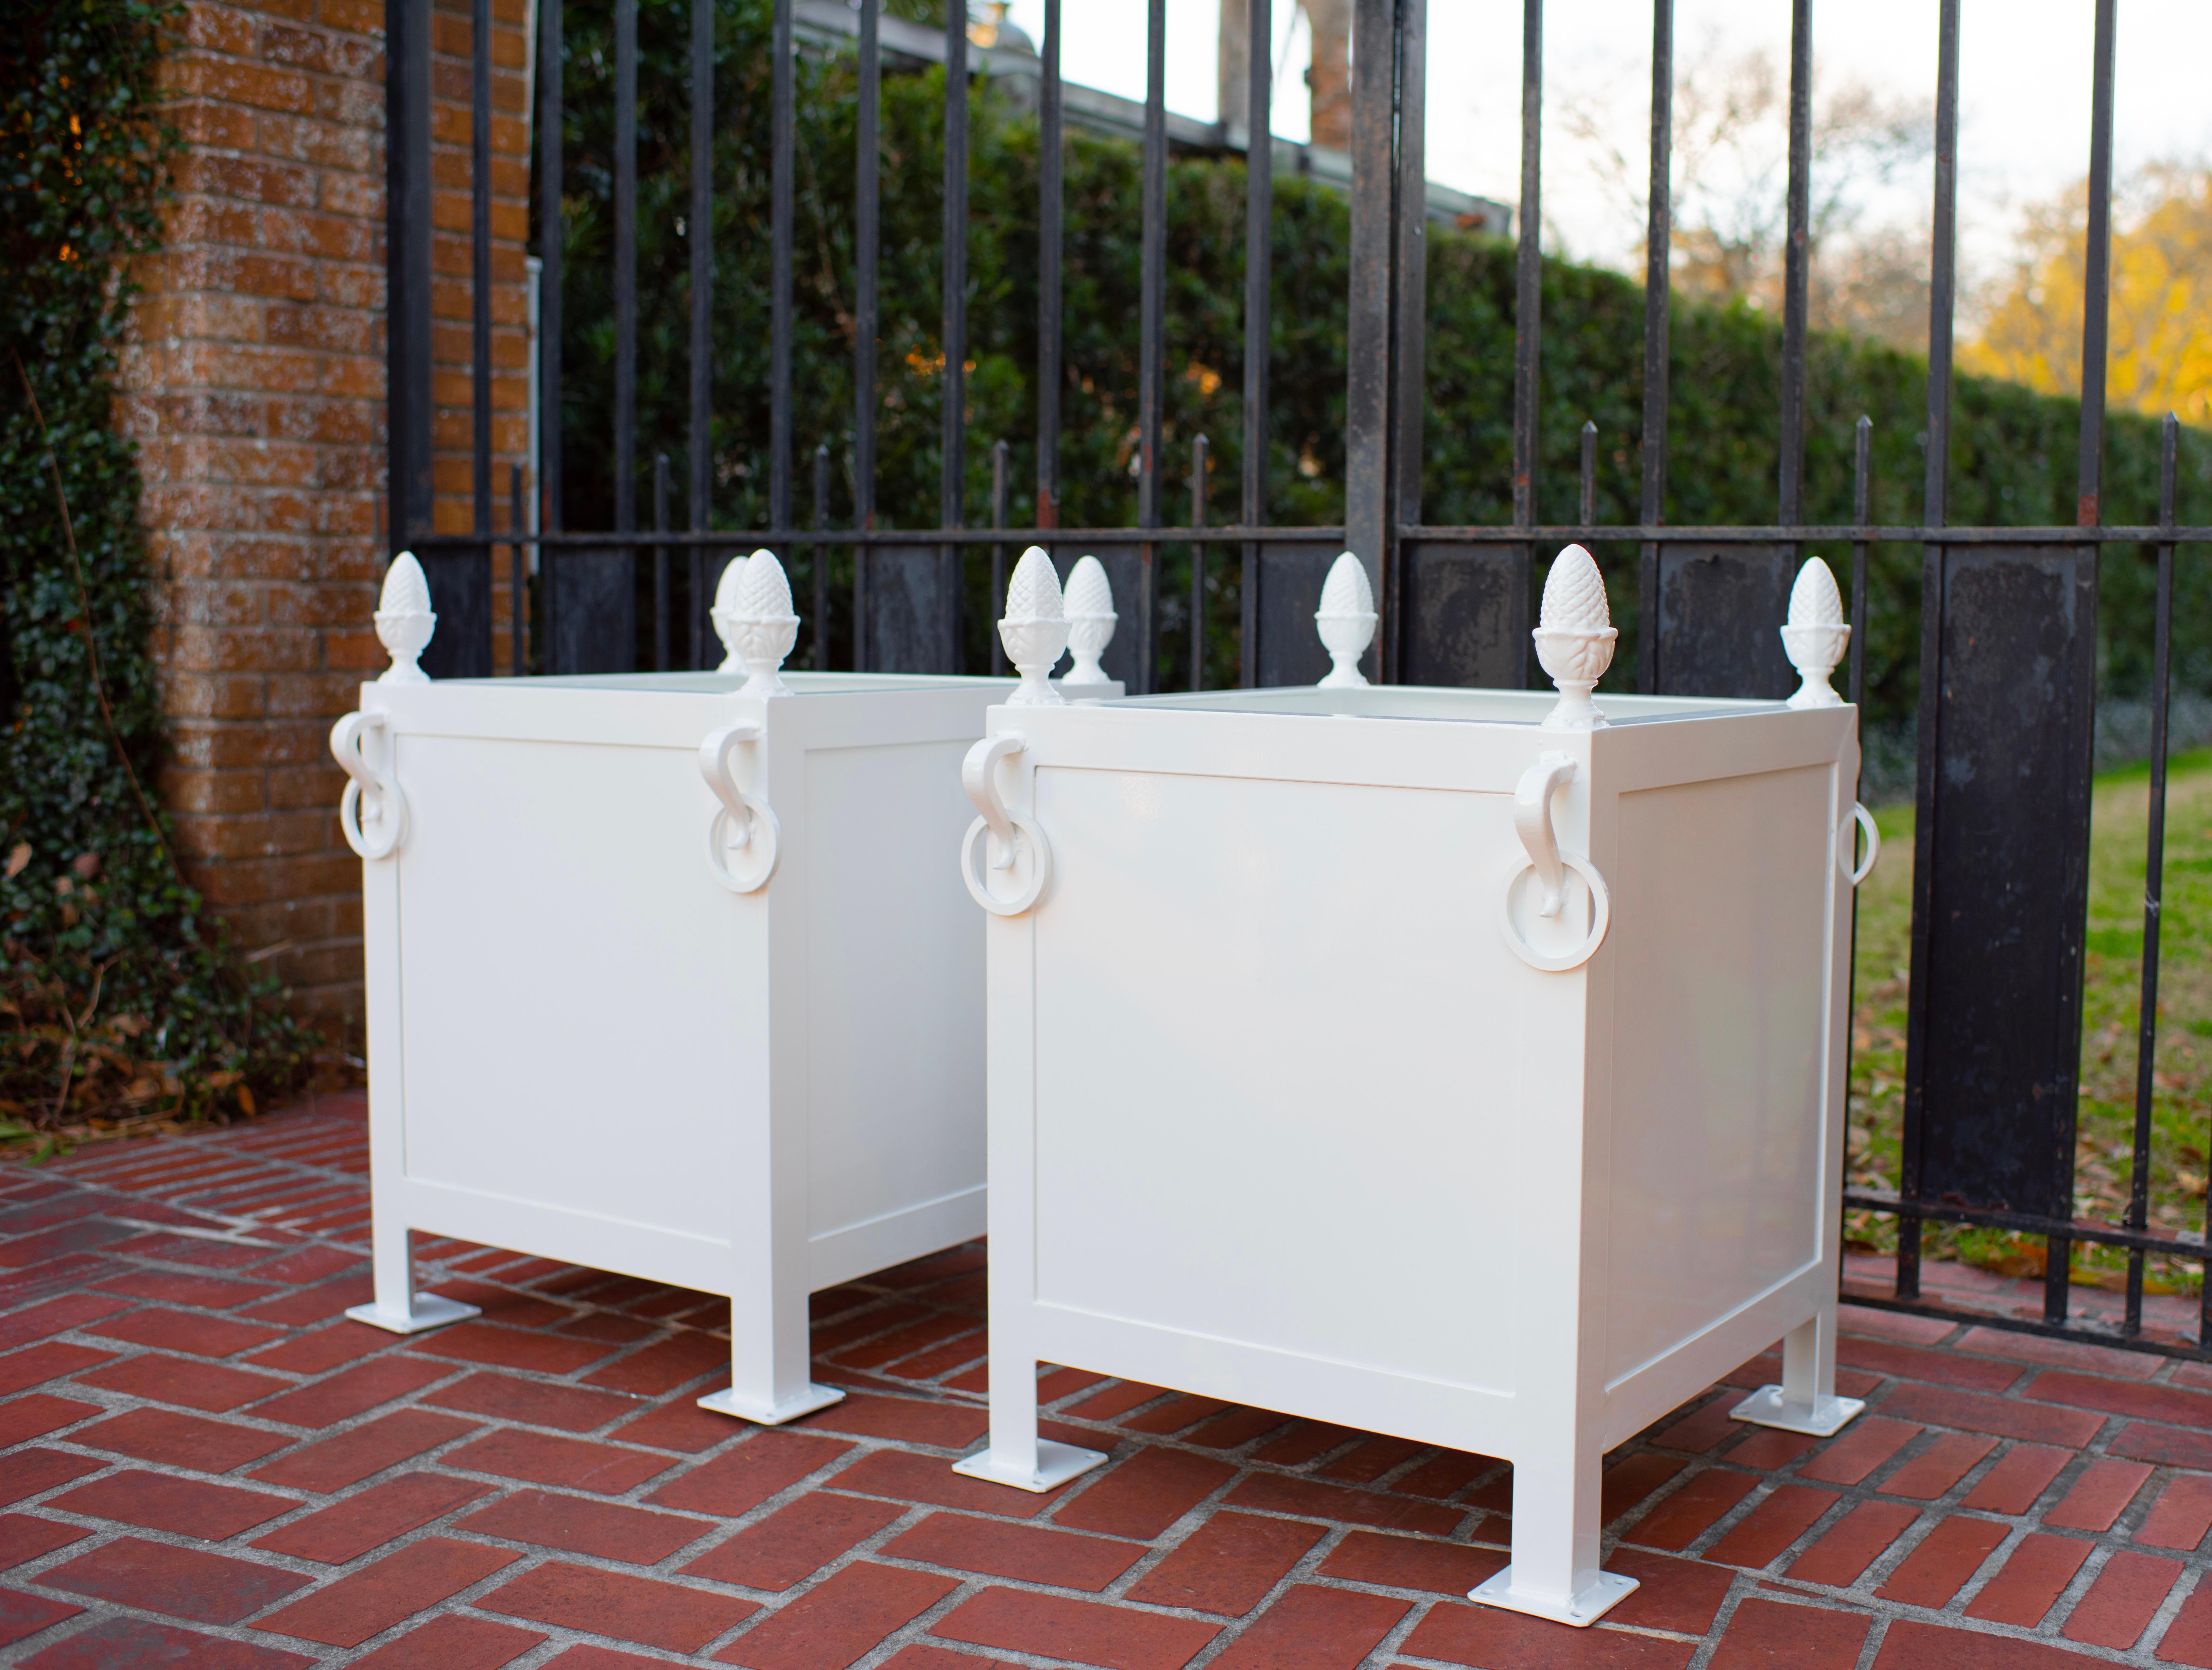 Single Bespoke Large Square French Style steel and cast iron orangerie planter box in lacquered white (as these are custom made to order, customers may request any color from the Benjamin Moore collection). Handcrafted in New Orleans by local